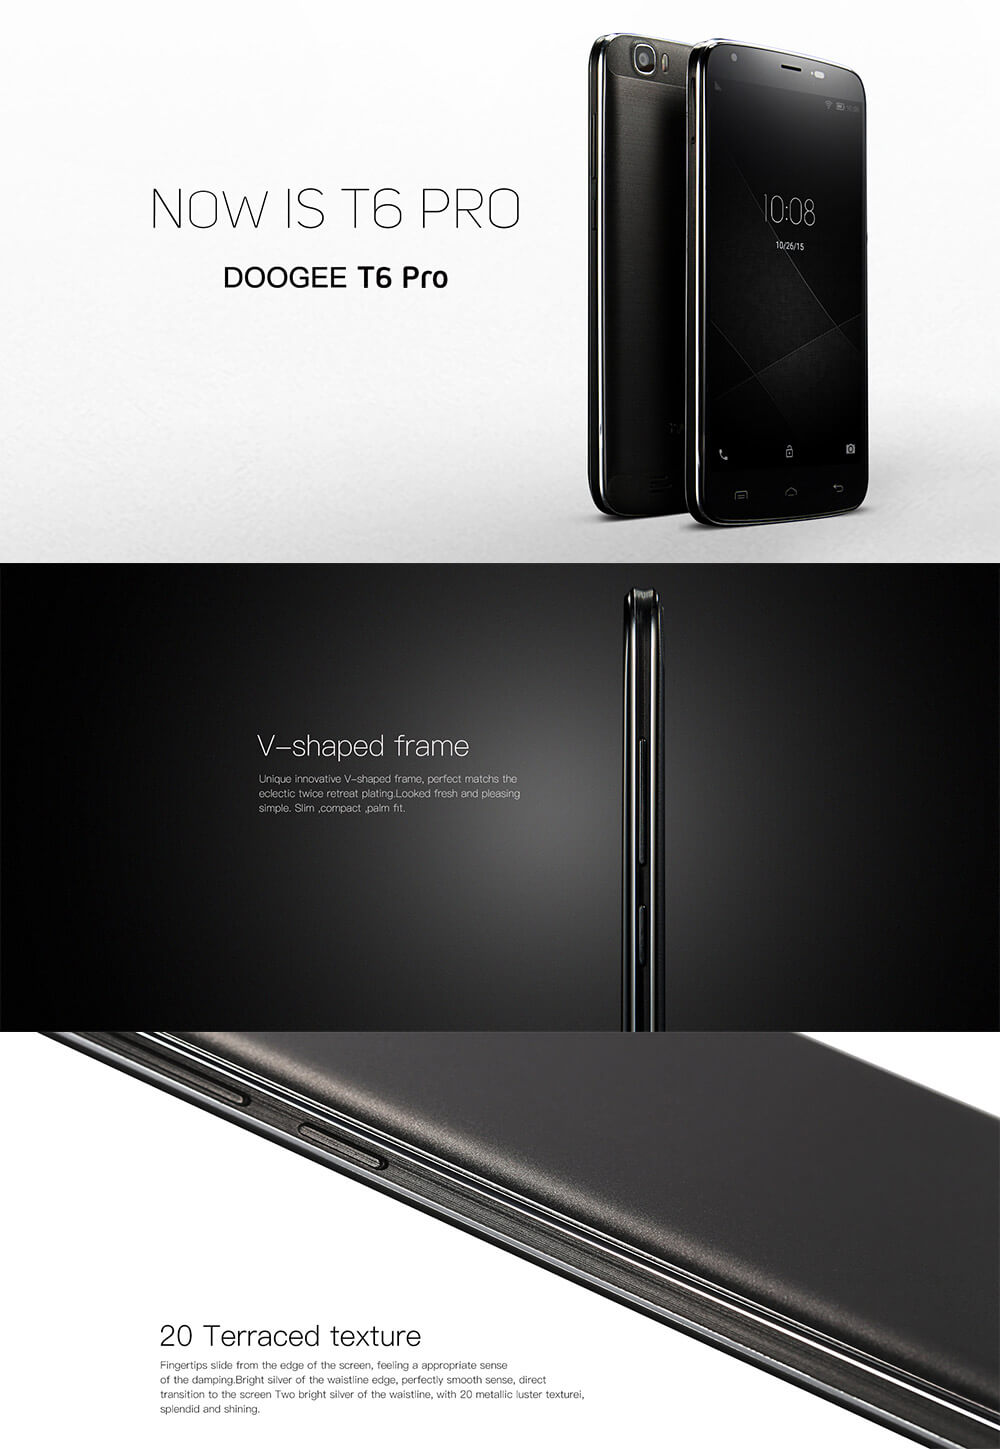 [HK Stock]DOOGEE T6 Pro 5.5inch IPS HD 4G LTE 6250mAh Battery Android 6.0 Smartphone MT6753 64-bit Octa Core 3GB 32GB 13.0MP Fast Charge OTG - Black